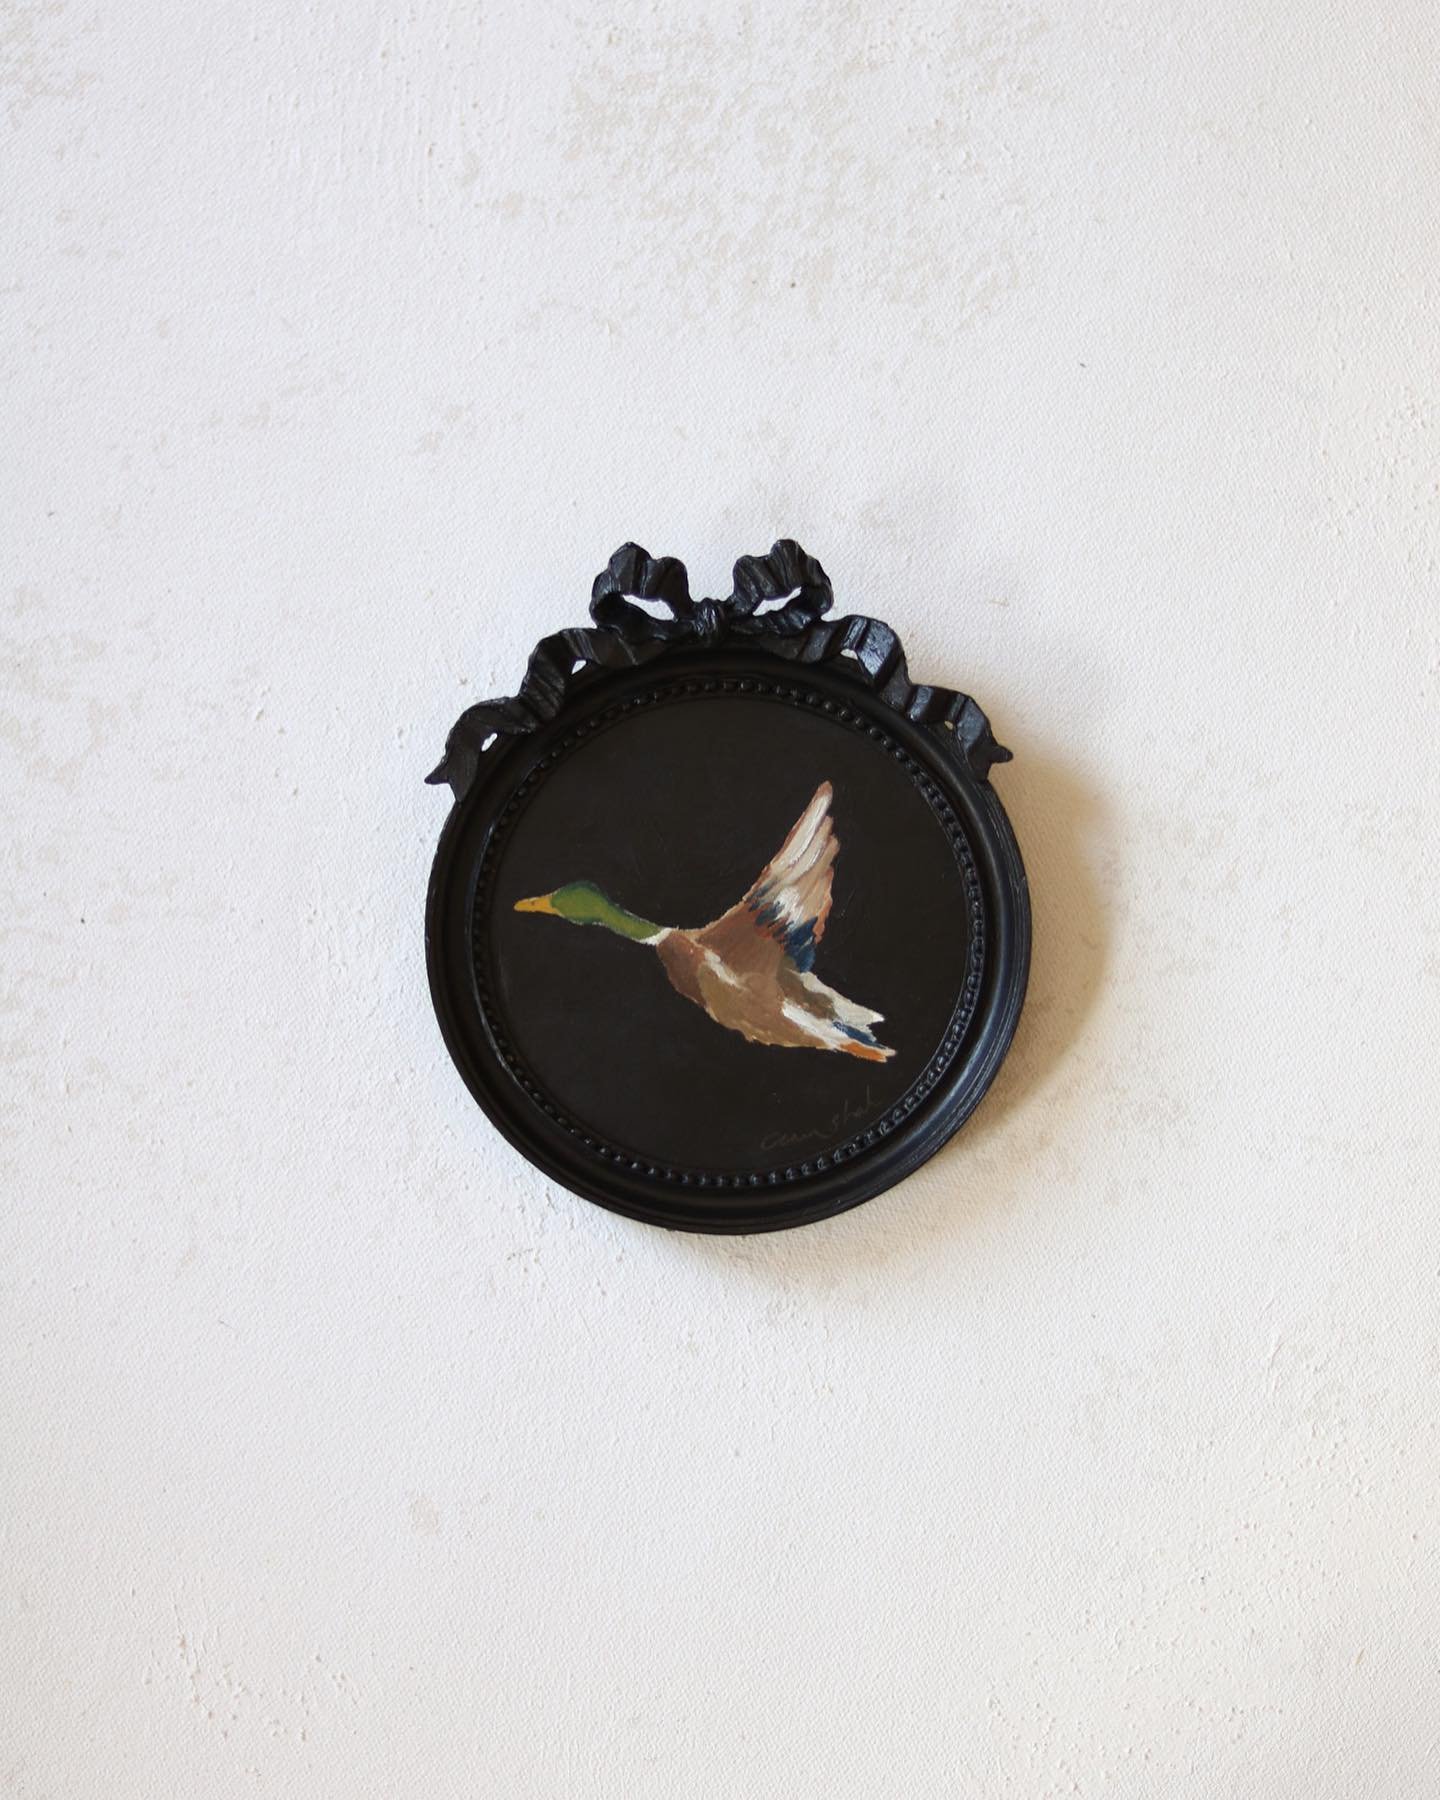 One Mallard in the cutest little vintage frame will be available in the Signs of Spring collection. Releasing on Thursday April 18th at 1pm Est for email subscribers. Later in the day for everybody else.